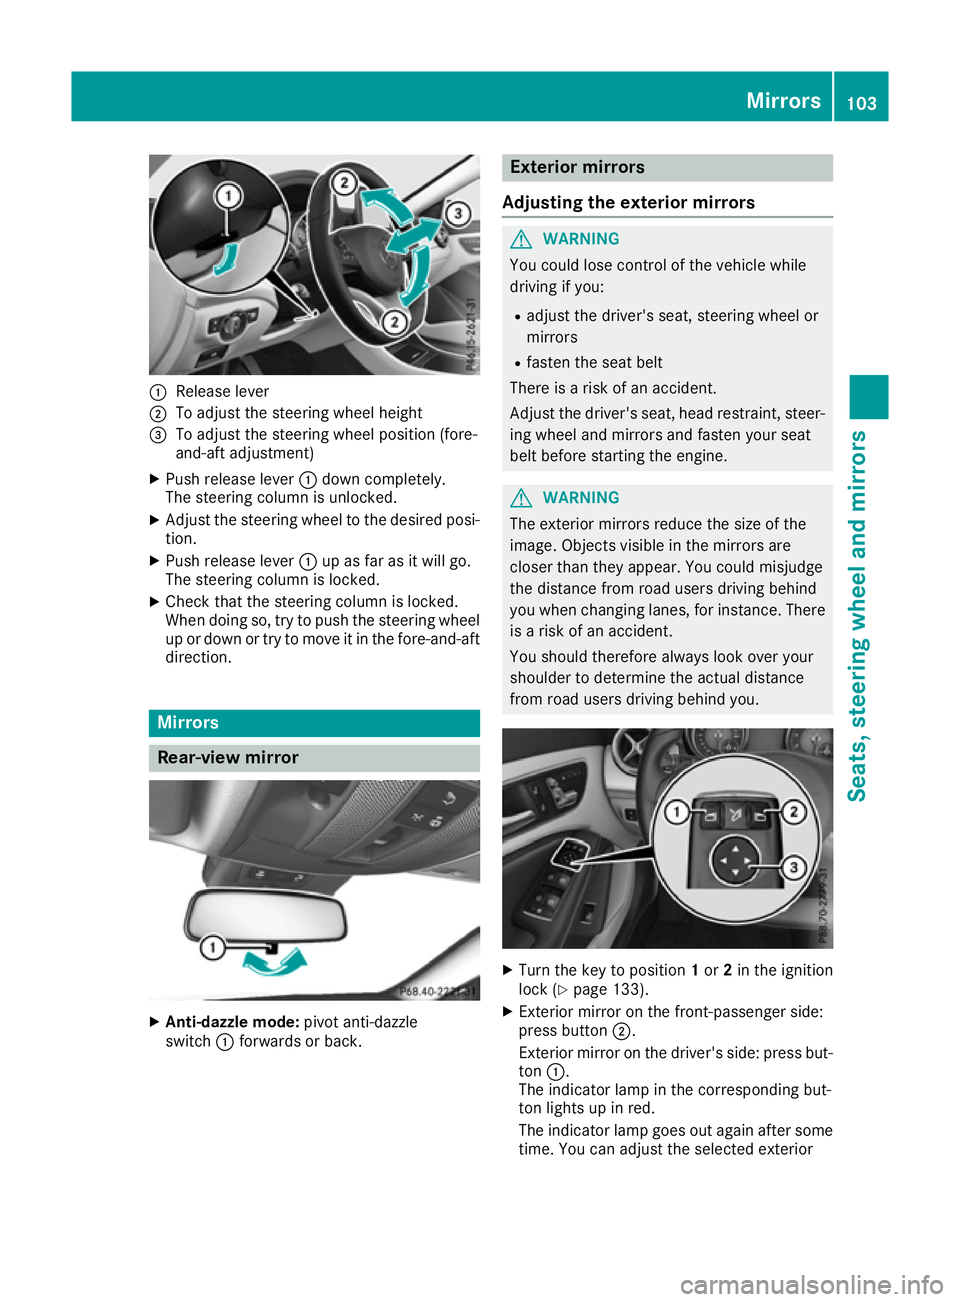 MERCEDES-BENZ CLA COUPE 2016  Owners Manual :
Release lever
; To adjust the steering wheel height
= To adjust the steering wheel position (fore-
and-aft adjustment)
X Push release lever :down completely.
The steering column is unlocked.
X Adjus